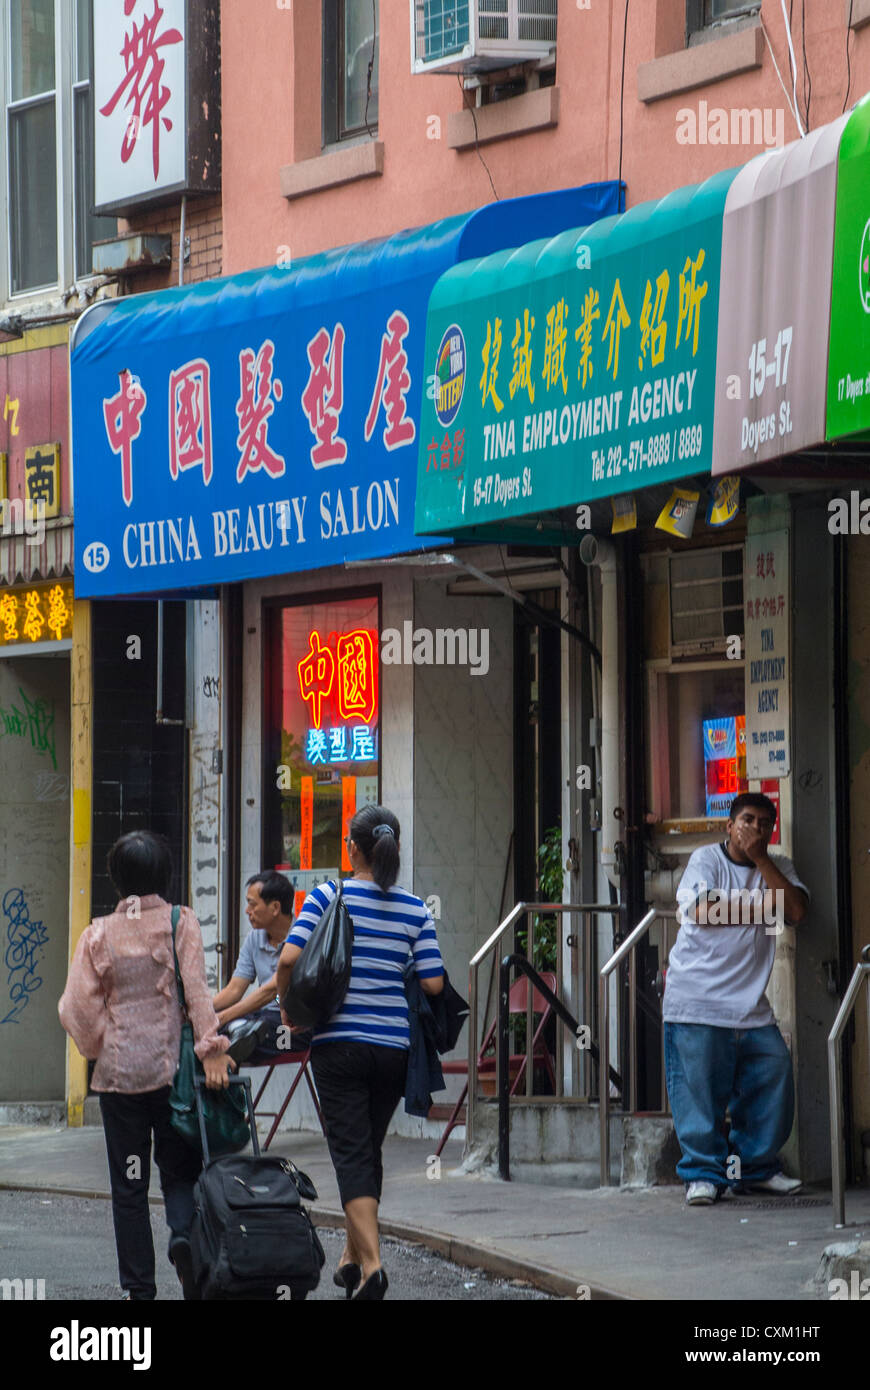 New York, NY, USA, Chinese Shop Signs, Barber Shops, Fronts, Beauty Salons, Street Scenes, Chinatown, Manhattan, busy city street united states Stock Photo